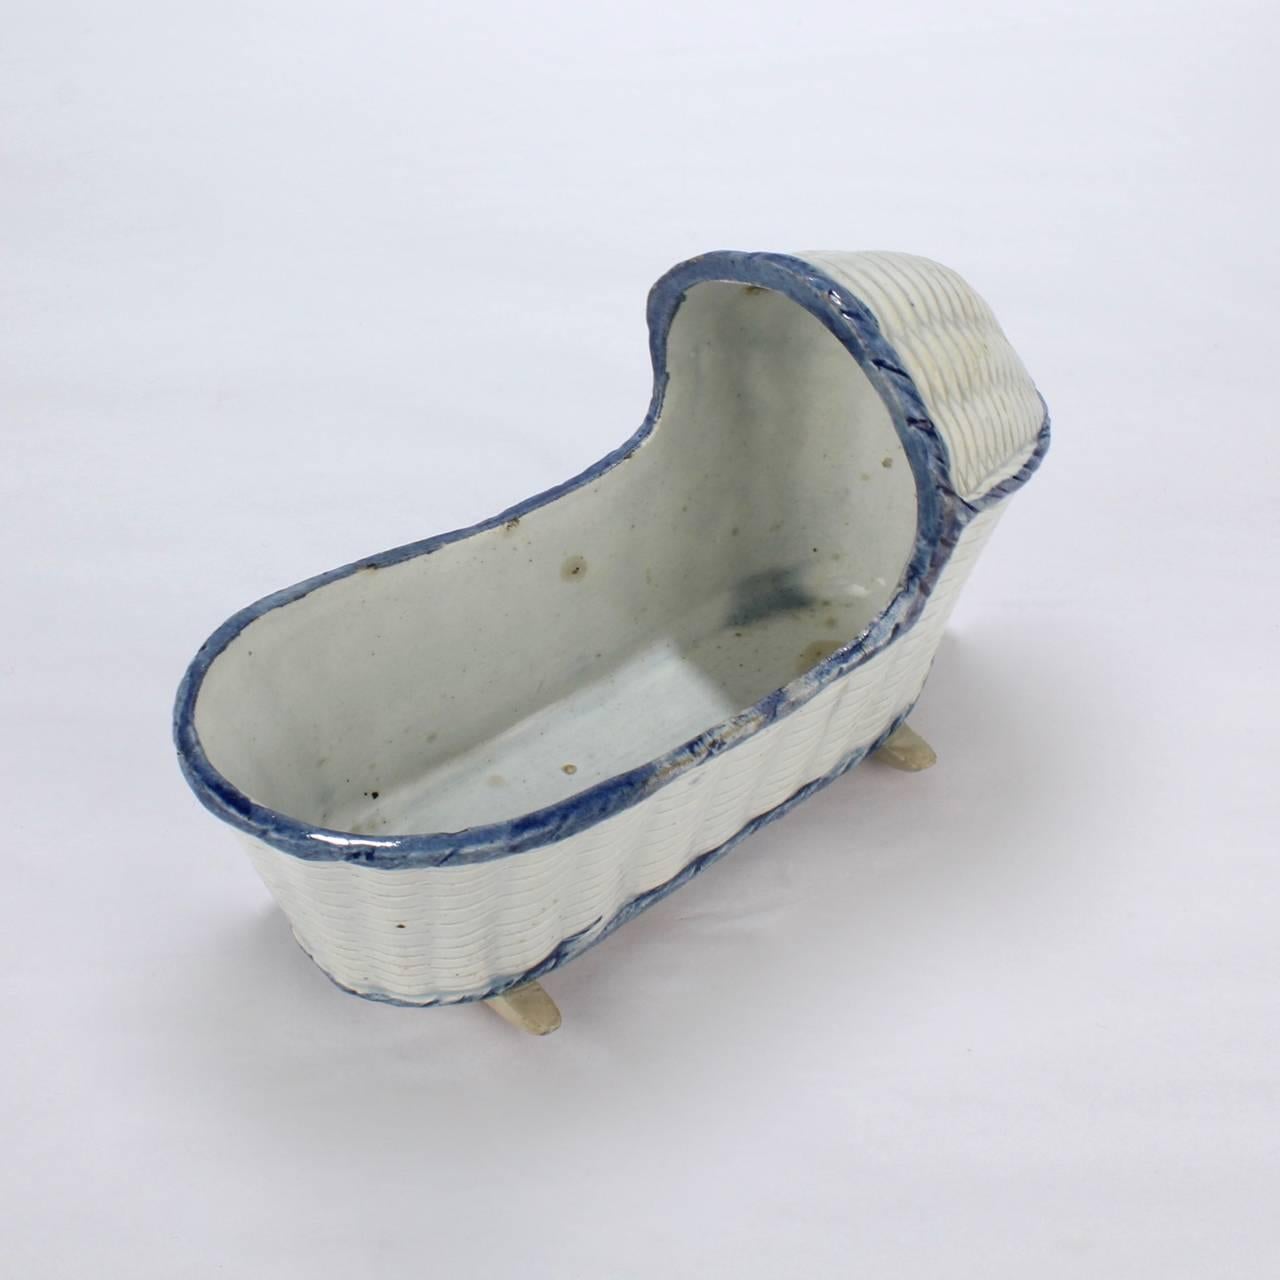 Large Antique English Blue & White Staffordshire or Pearlware Cradle Figurine For Sale 3